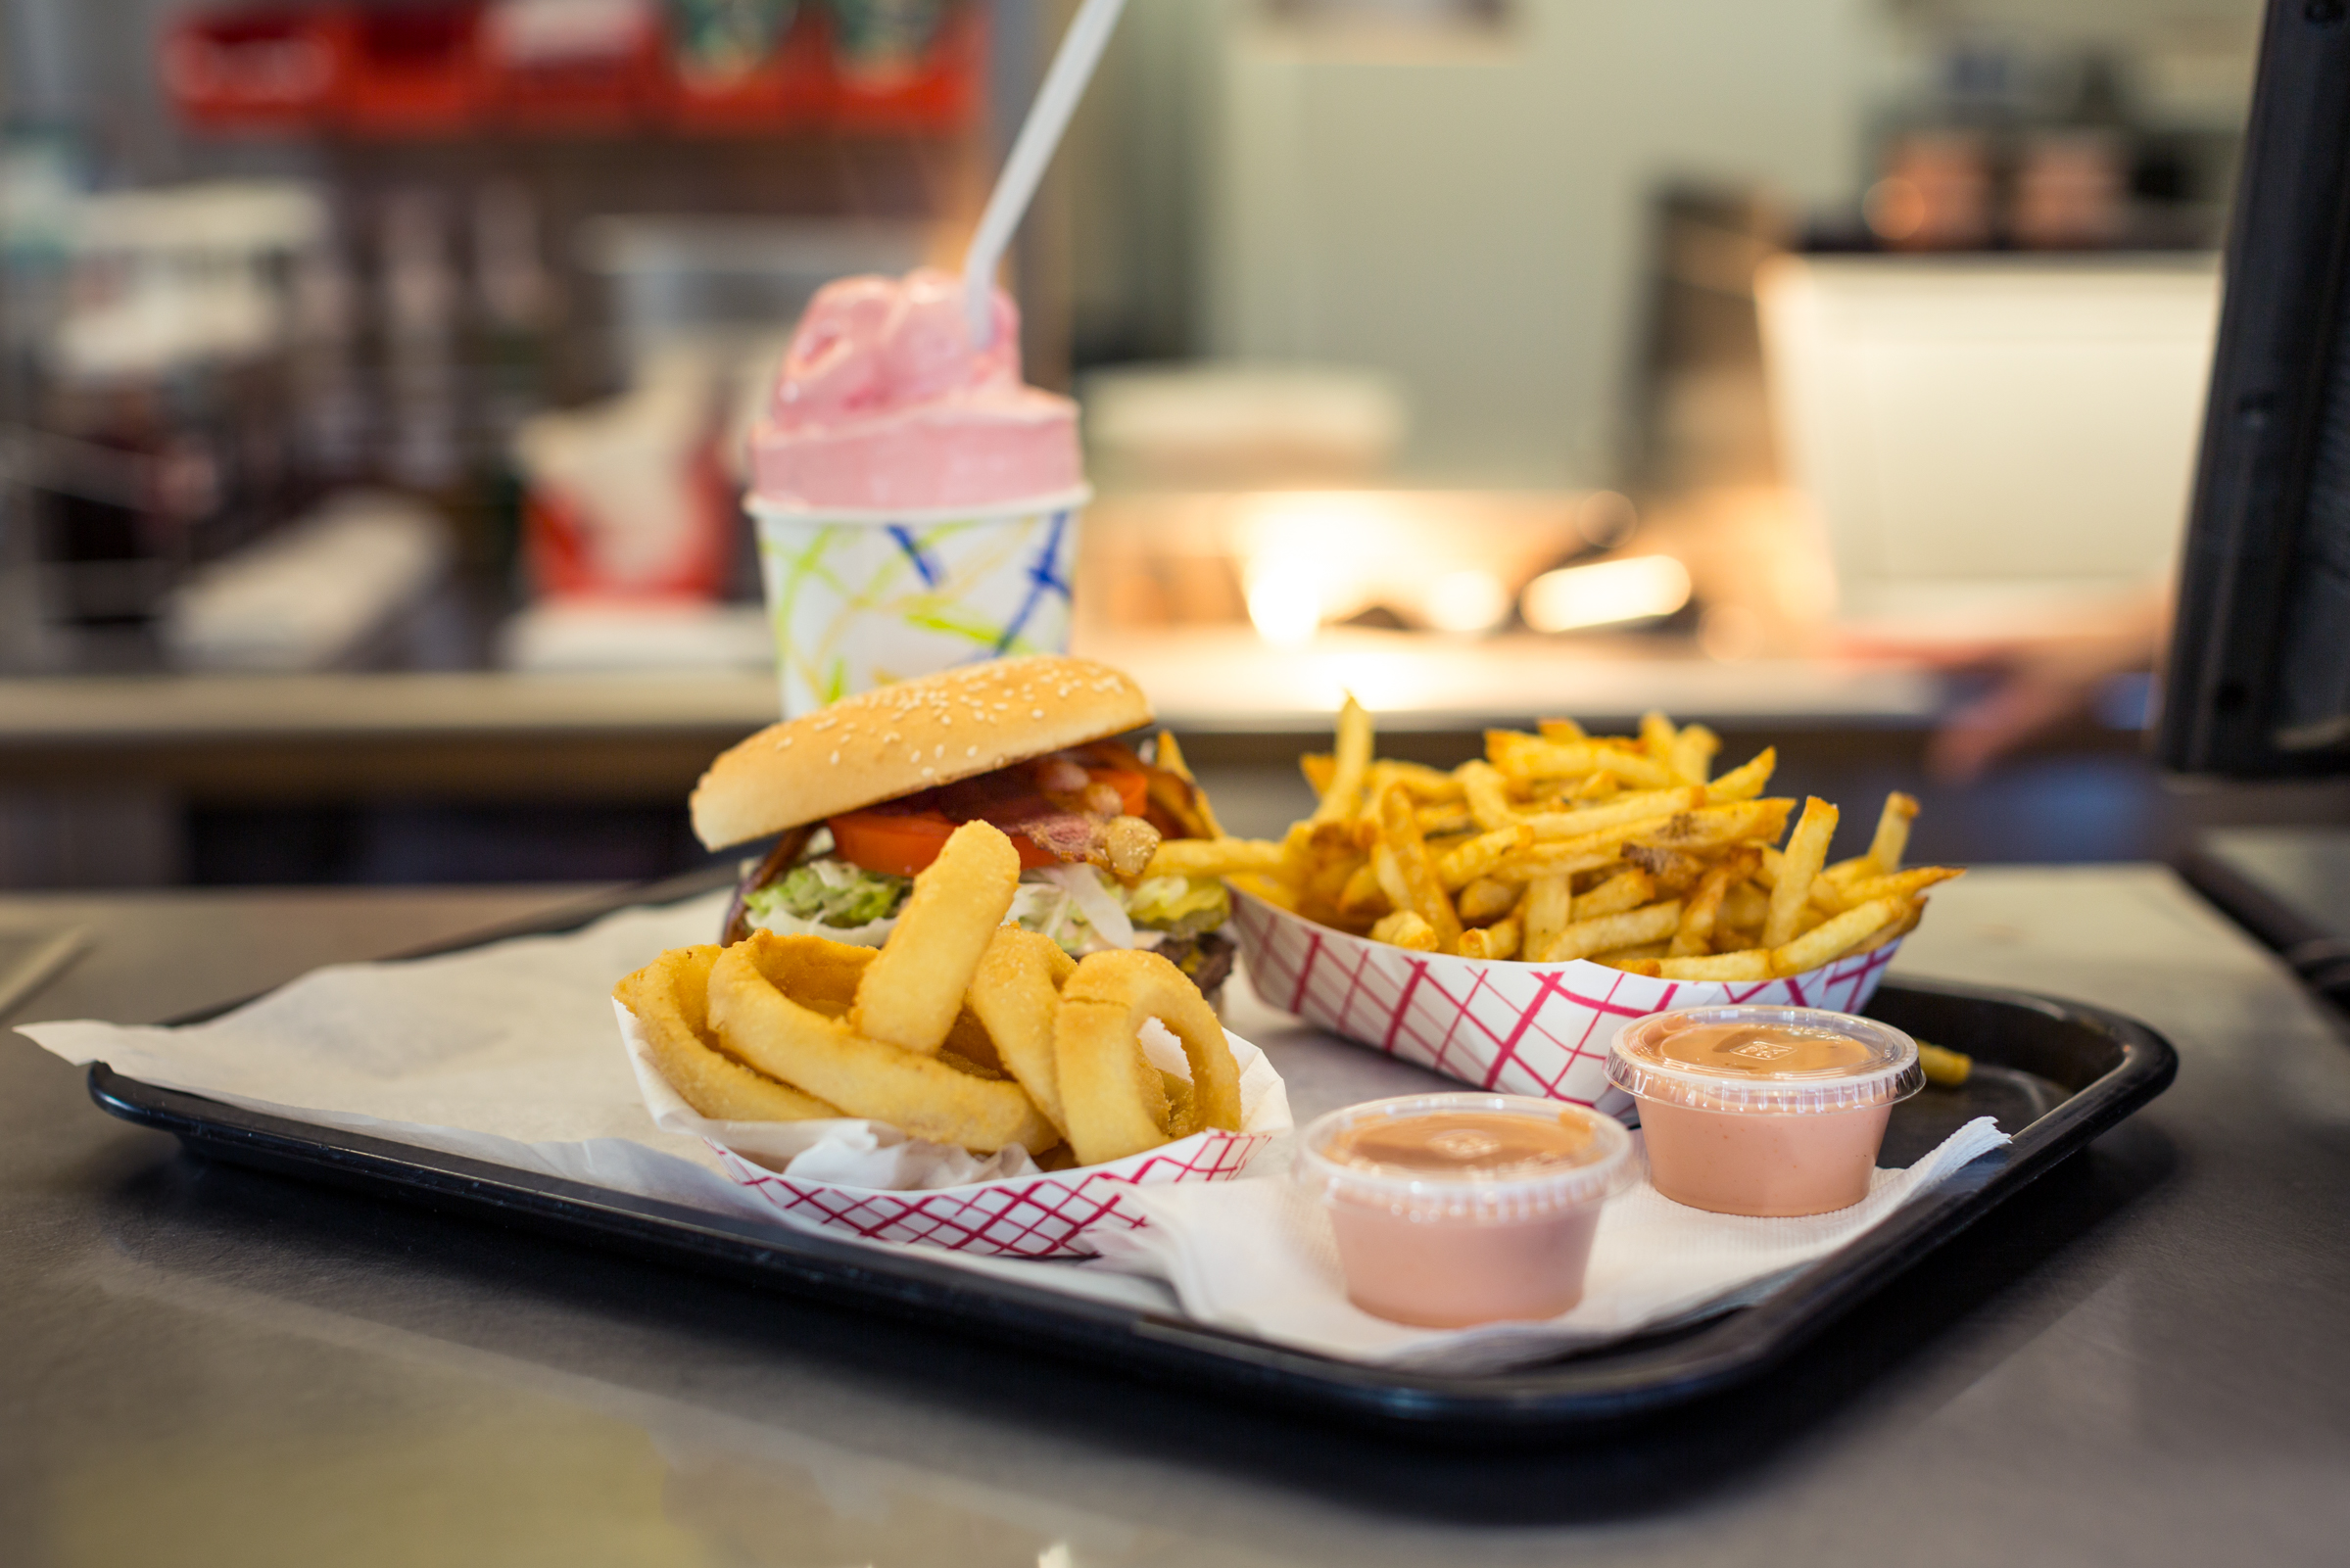 Millie’s Burgers  – Shakes and Malts, Burgers and Fries – Just Like Always